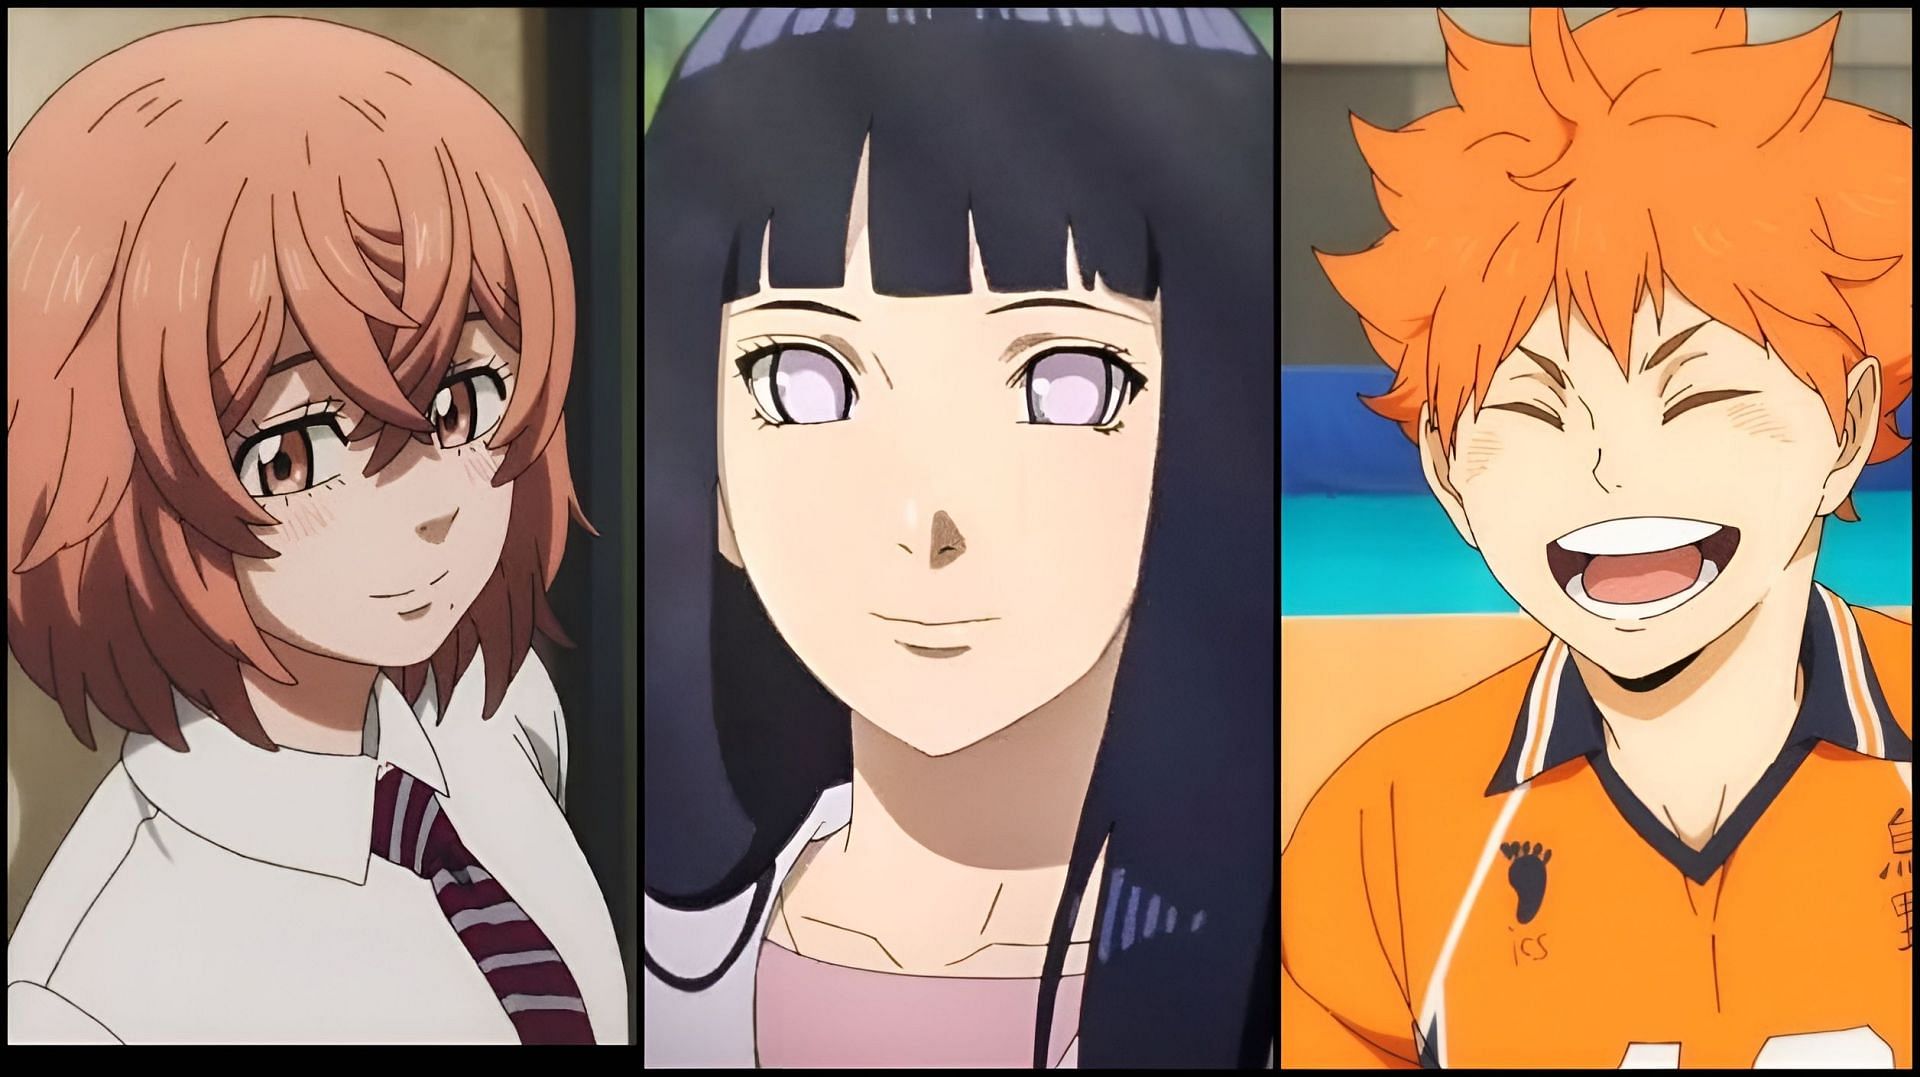 9 anime characters named Hinata, ranked from least to most popular